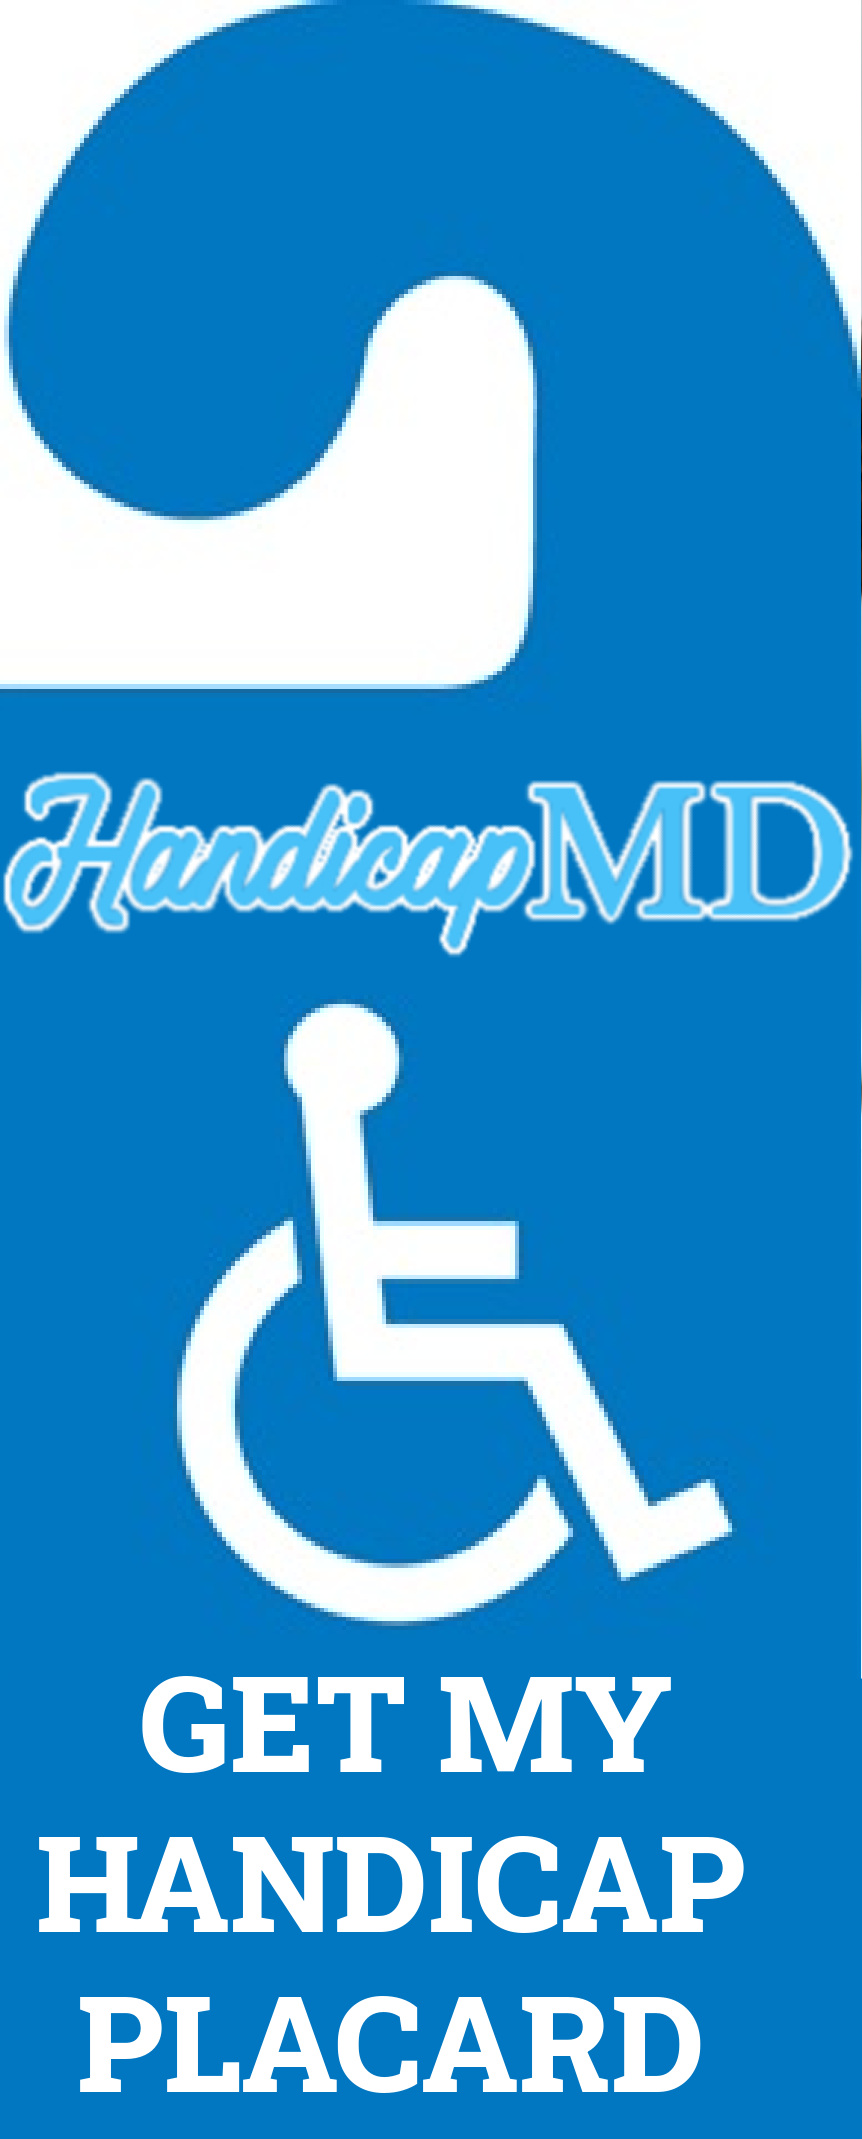 Myths vs. Facts: Debunking Common Misconceptions about Handicap Placards in Maryland